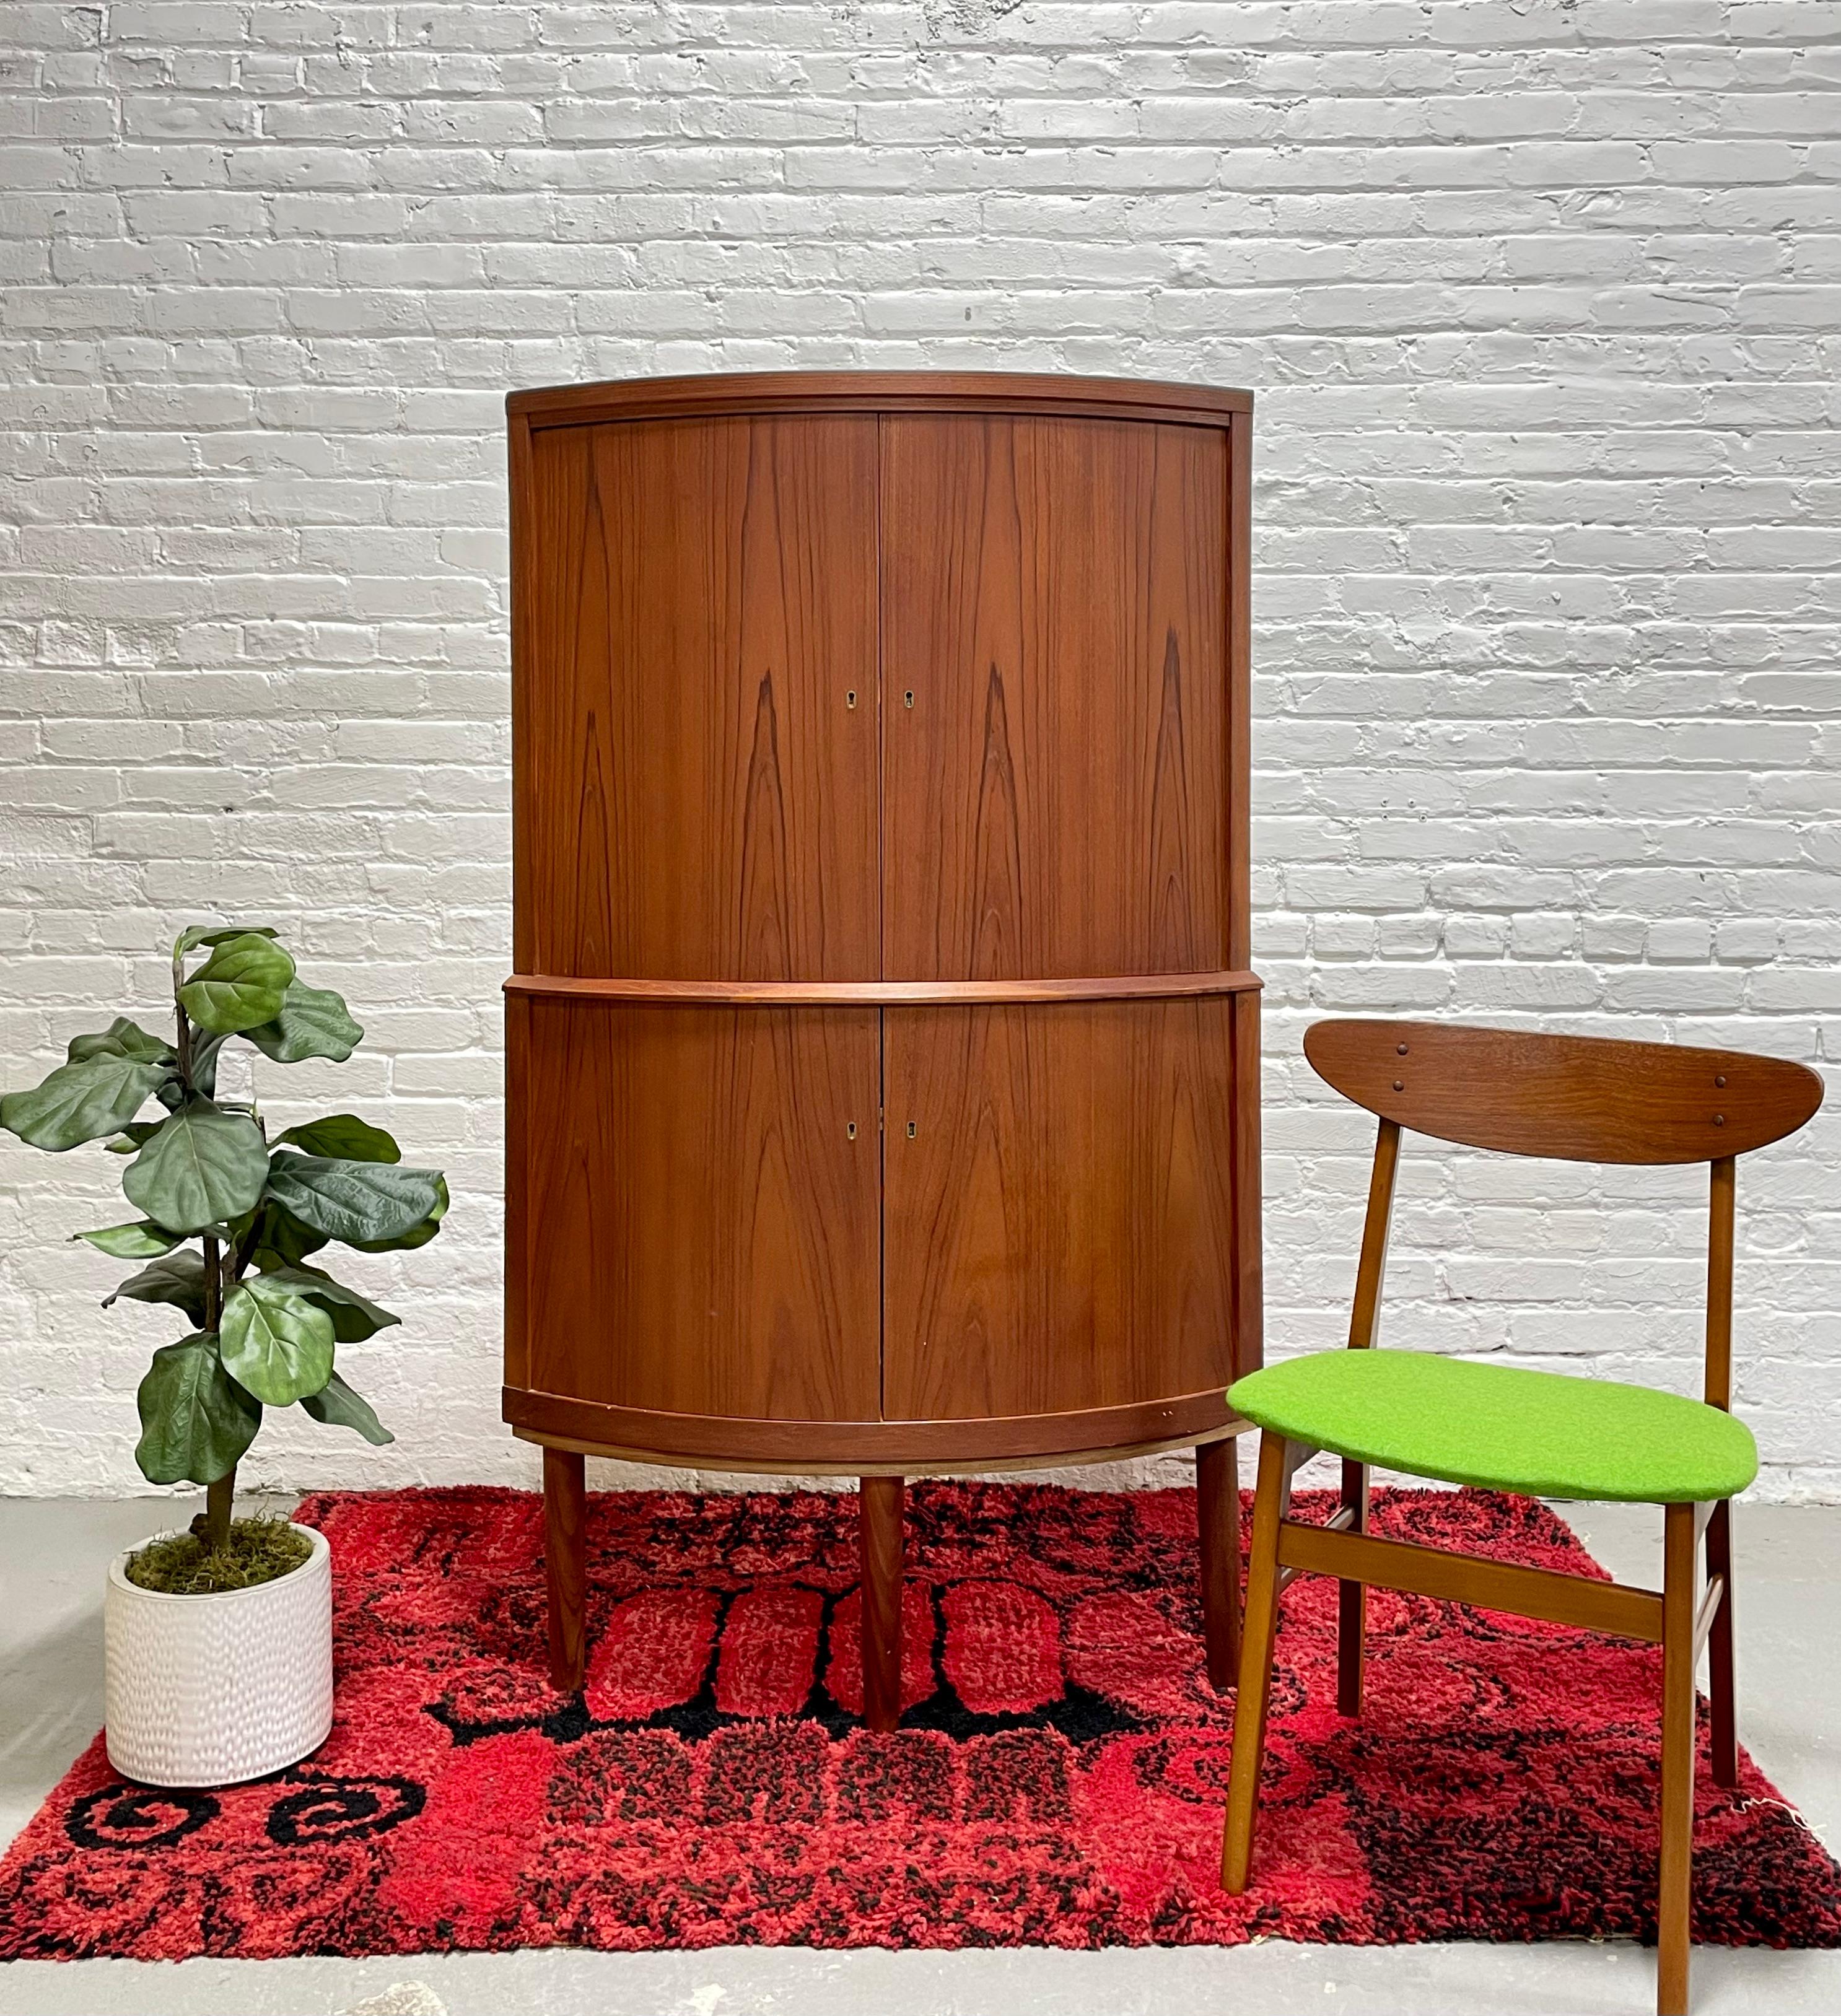 Mid Century Modern Teak Corner Liquor Bar / China Cabinet, Made in Denmark. Perfect piece where space is an issue as it offers plenty of storage space yet tucks away neatly into a corner taking up minimal floor space. Mirrored upper area - set up